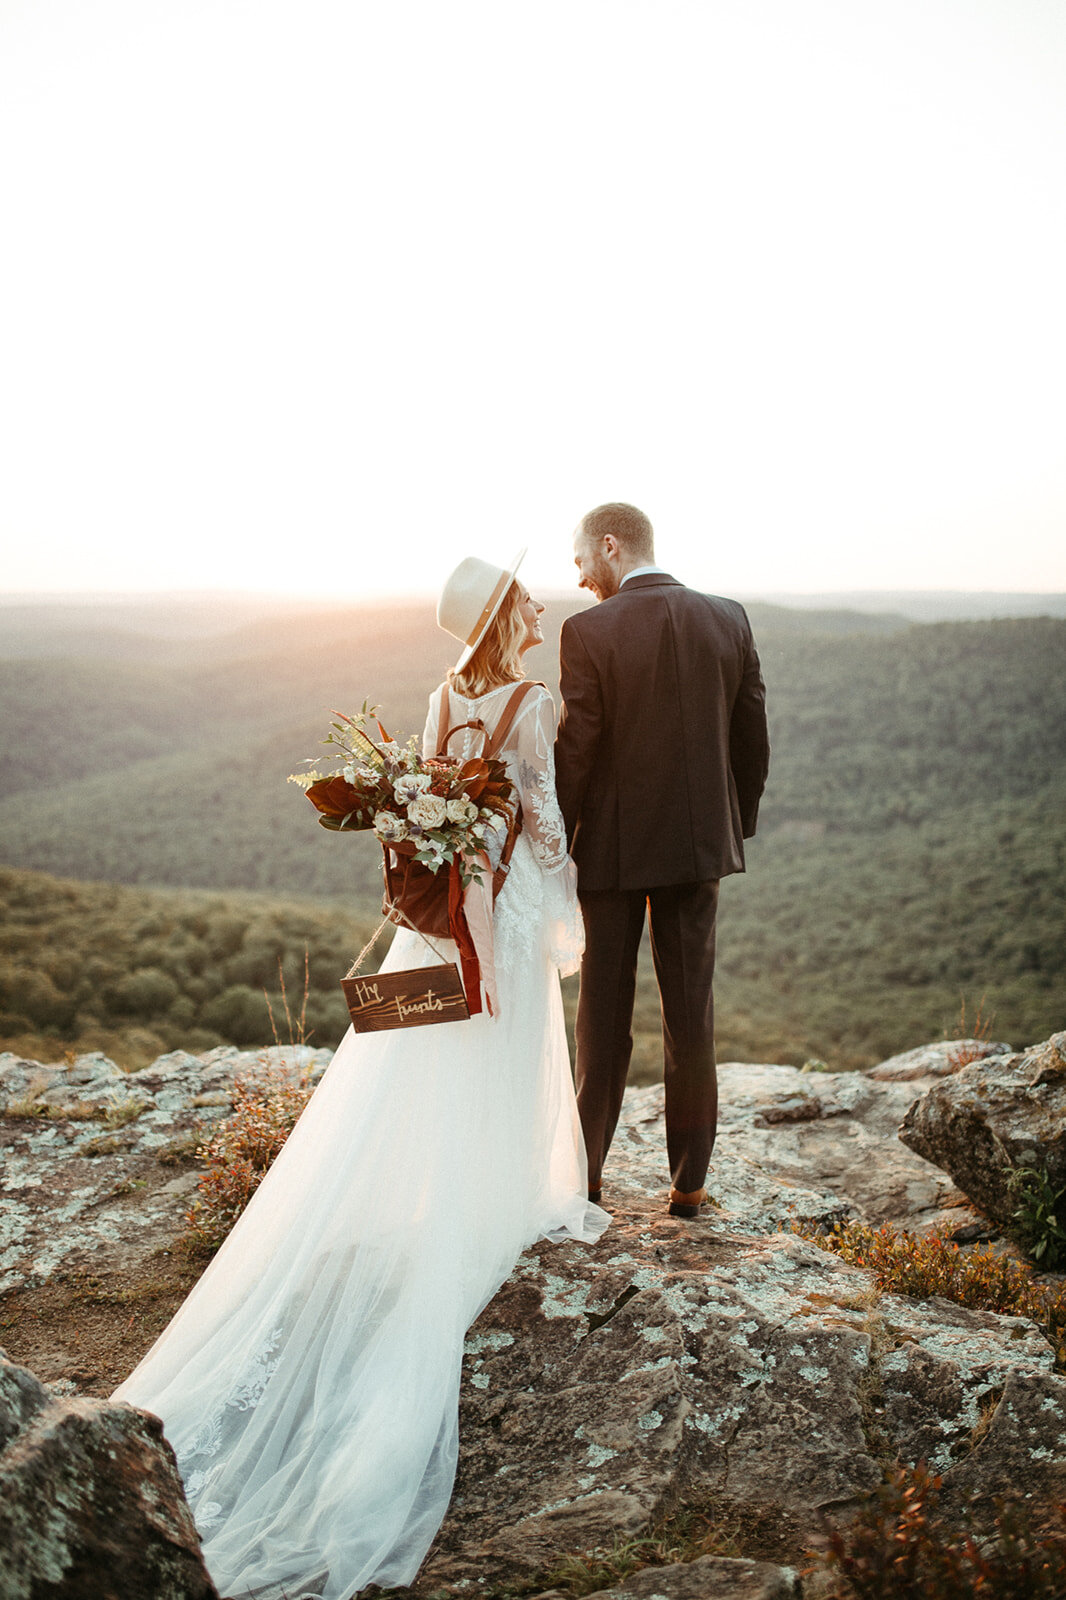 laura powers photo, arkansas wedding and elopement photographer, styled by creatives, white rock mountain wedding, elopement in arkansas, arkansas weddings -0028_websize.jpg